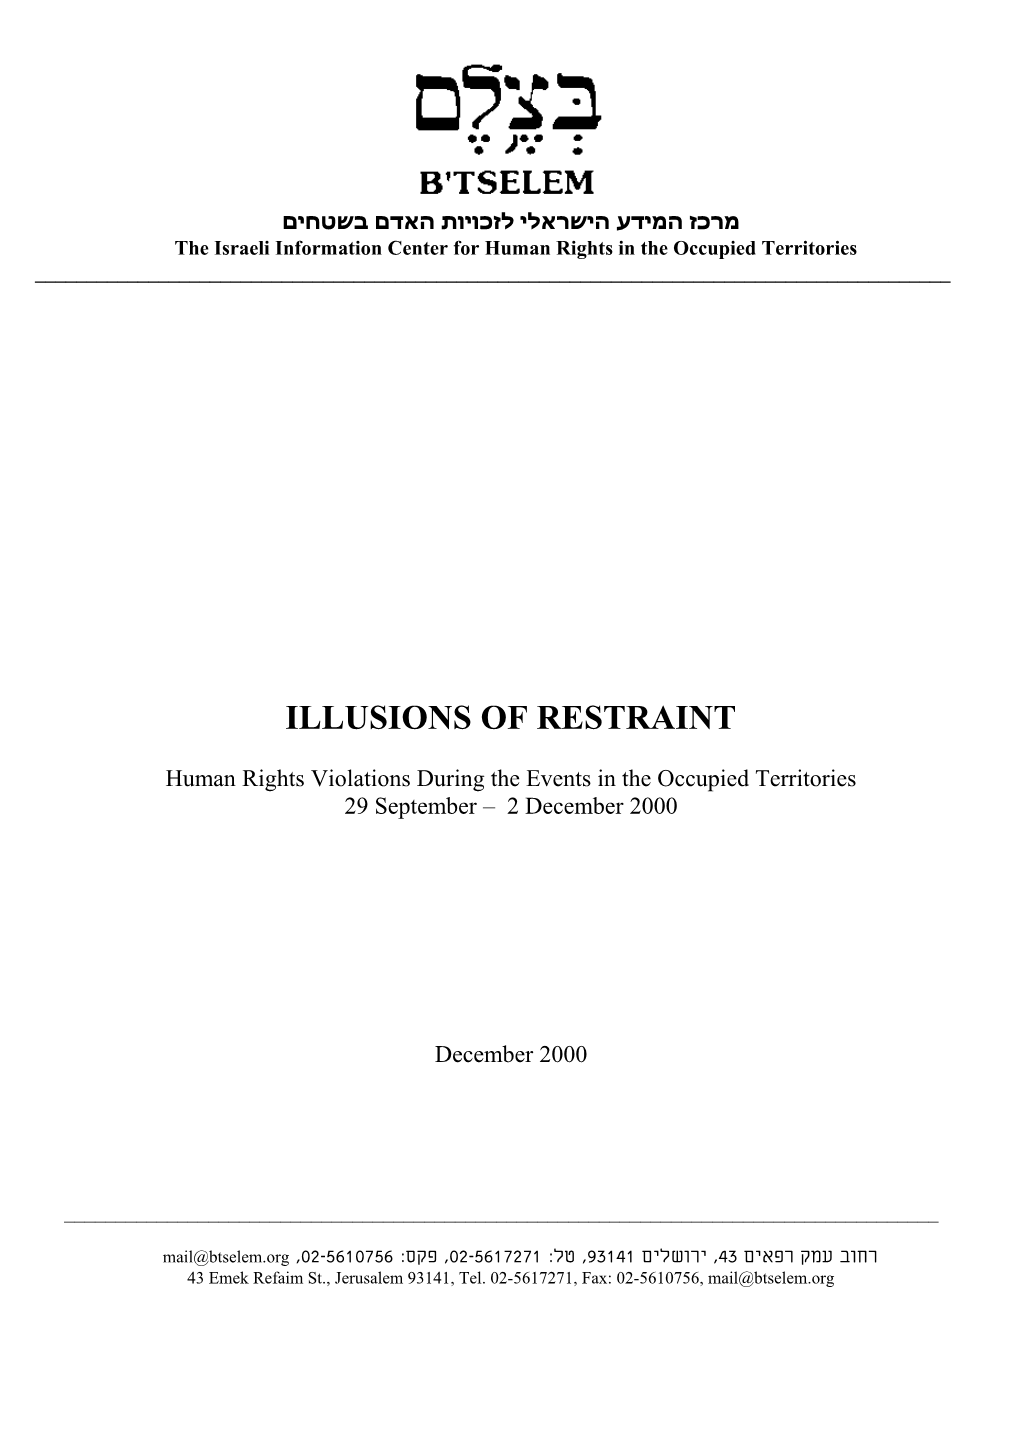 B'tselem: Illusions of Restraint: Human Rights Violations During the Events in the Occupied